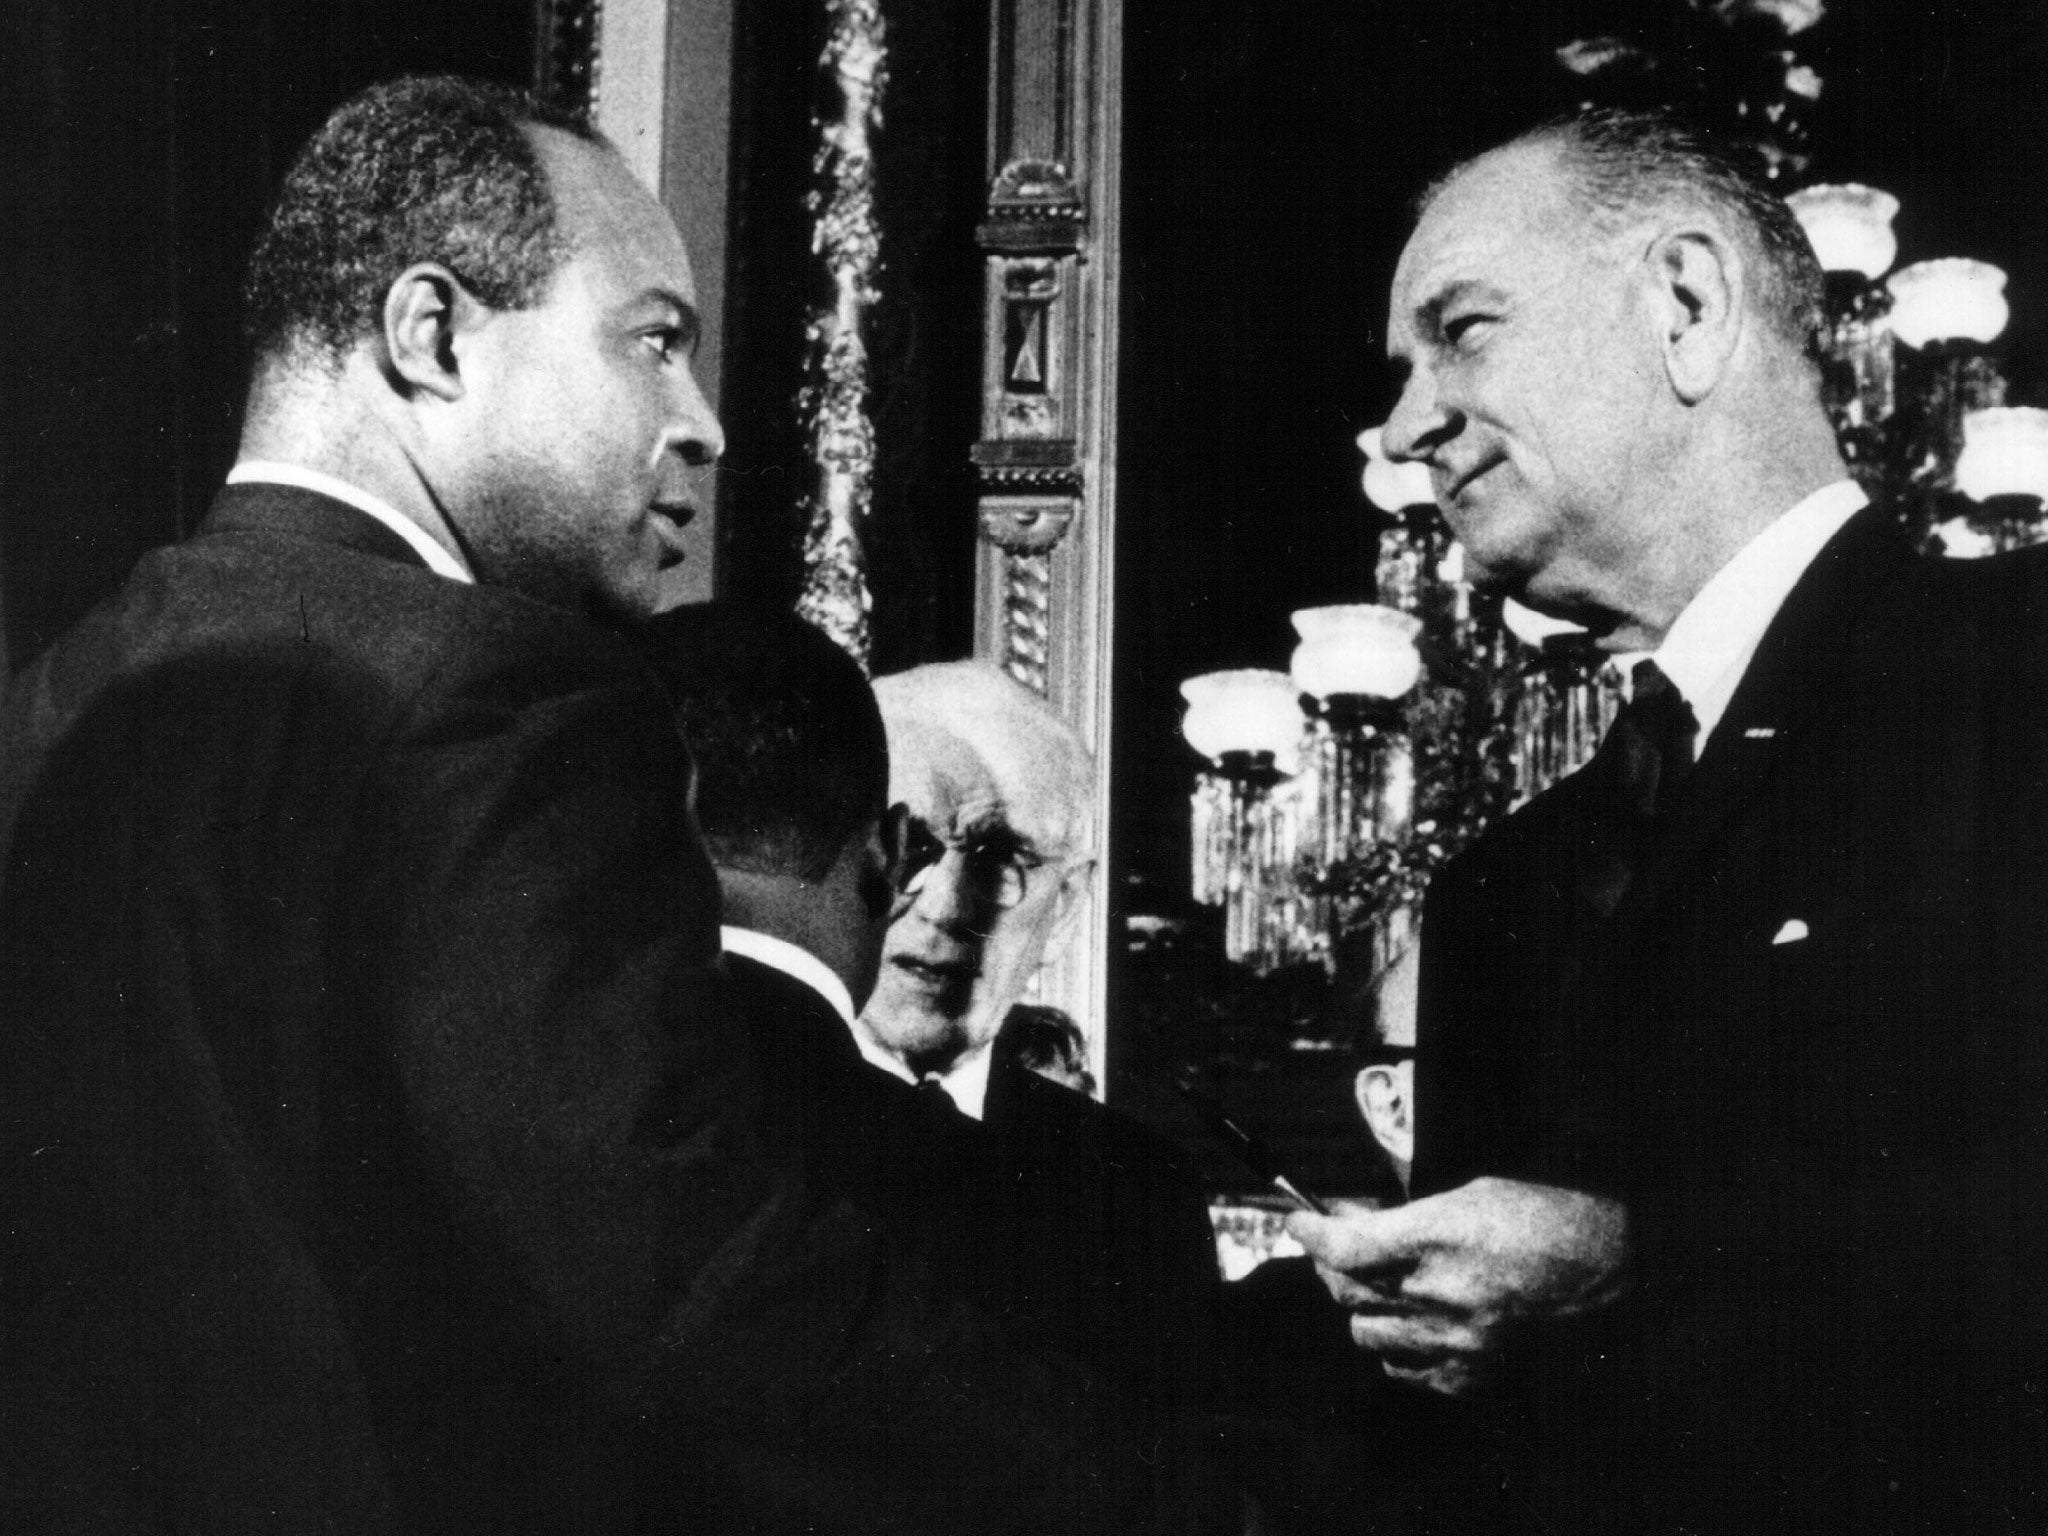 President Lyndon B. Johnson presents one of the pens used to sign the Voting Rights Act of 1965 to James Farmer, Director of the Congress of Racial Equality on August 6, 1965